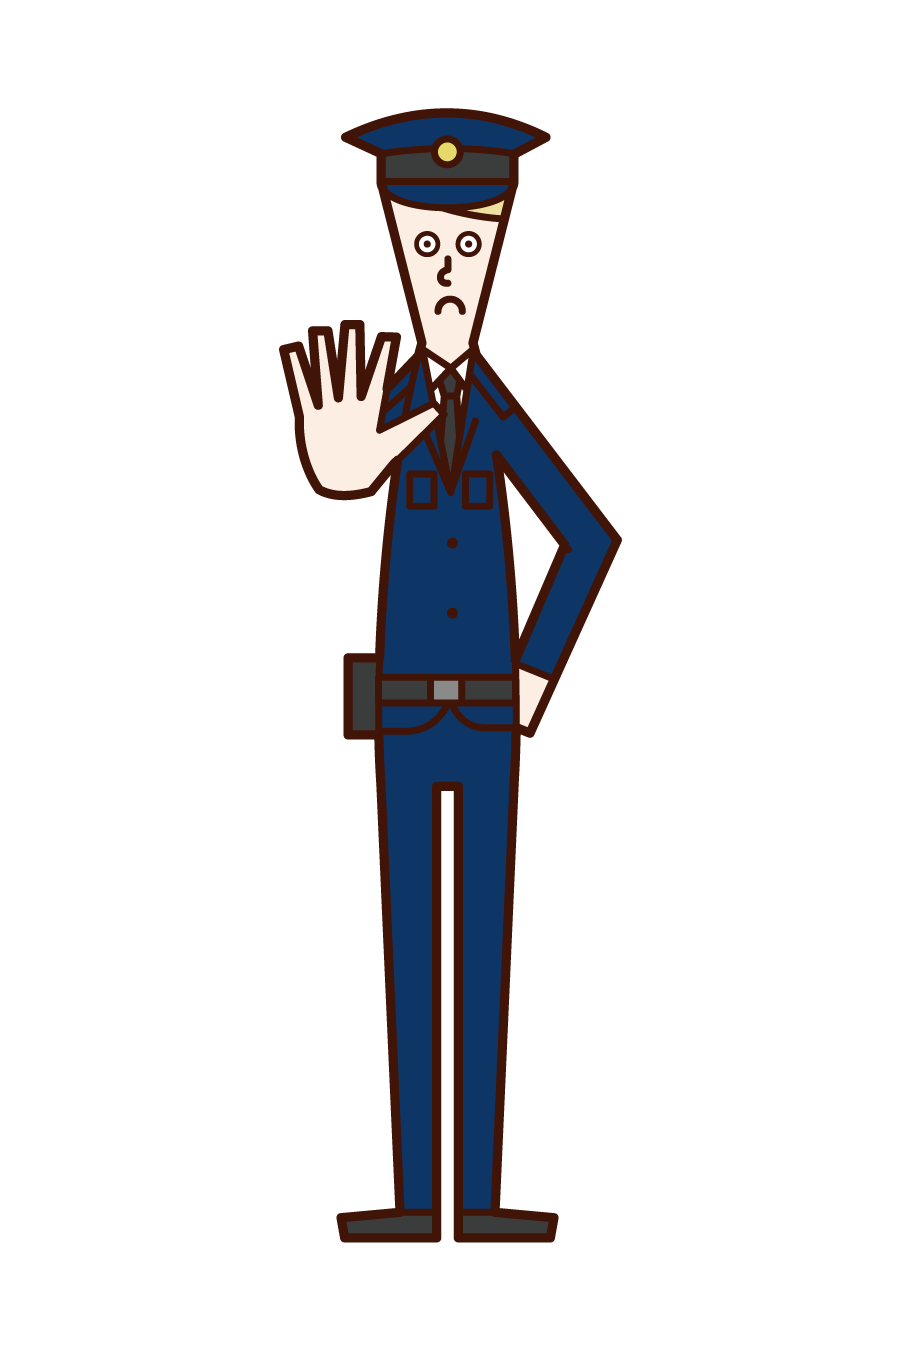 Illustration of a police officer (man) ordered off-limits